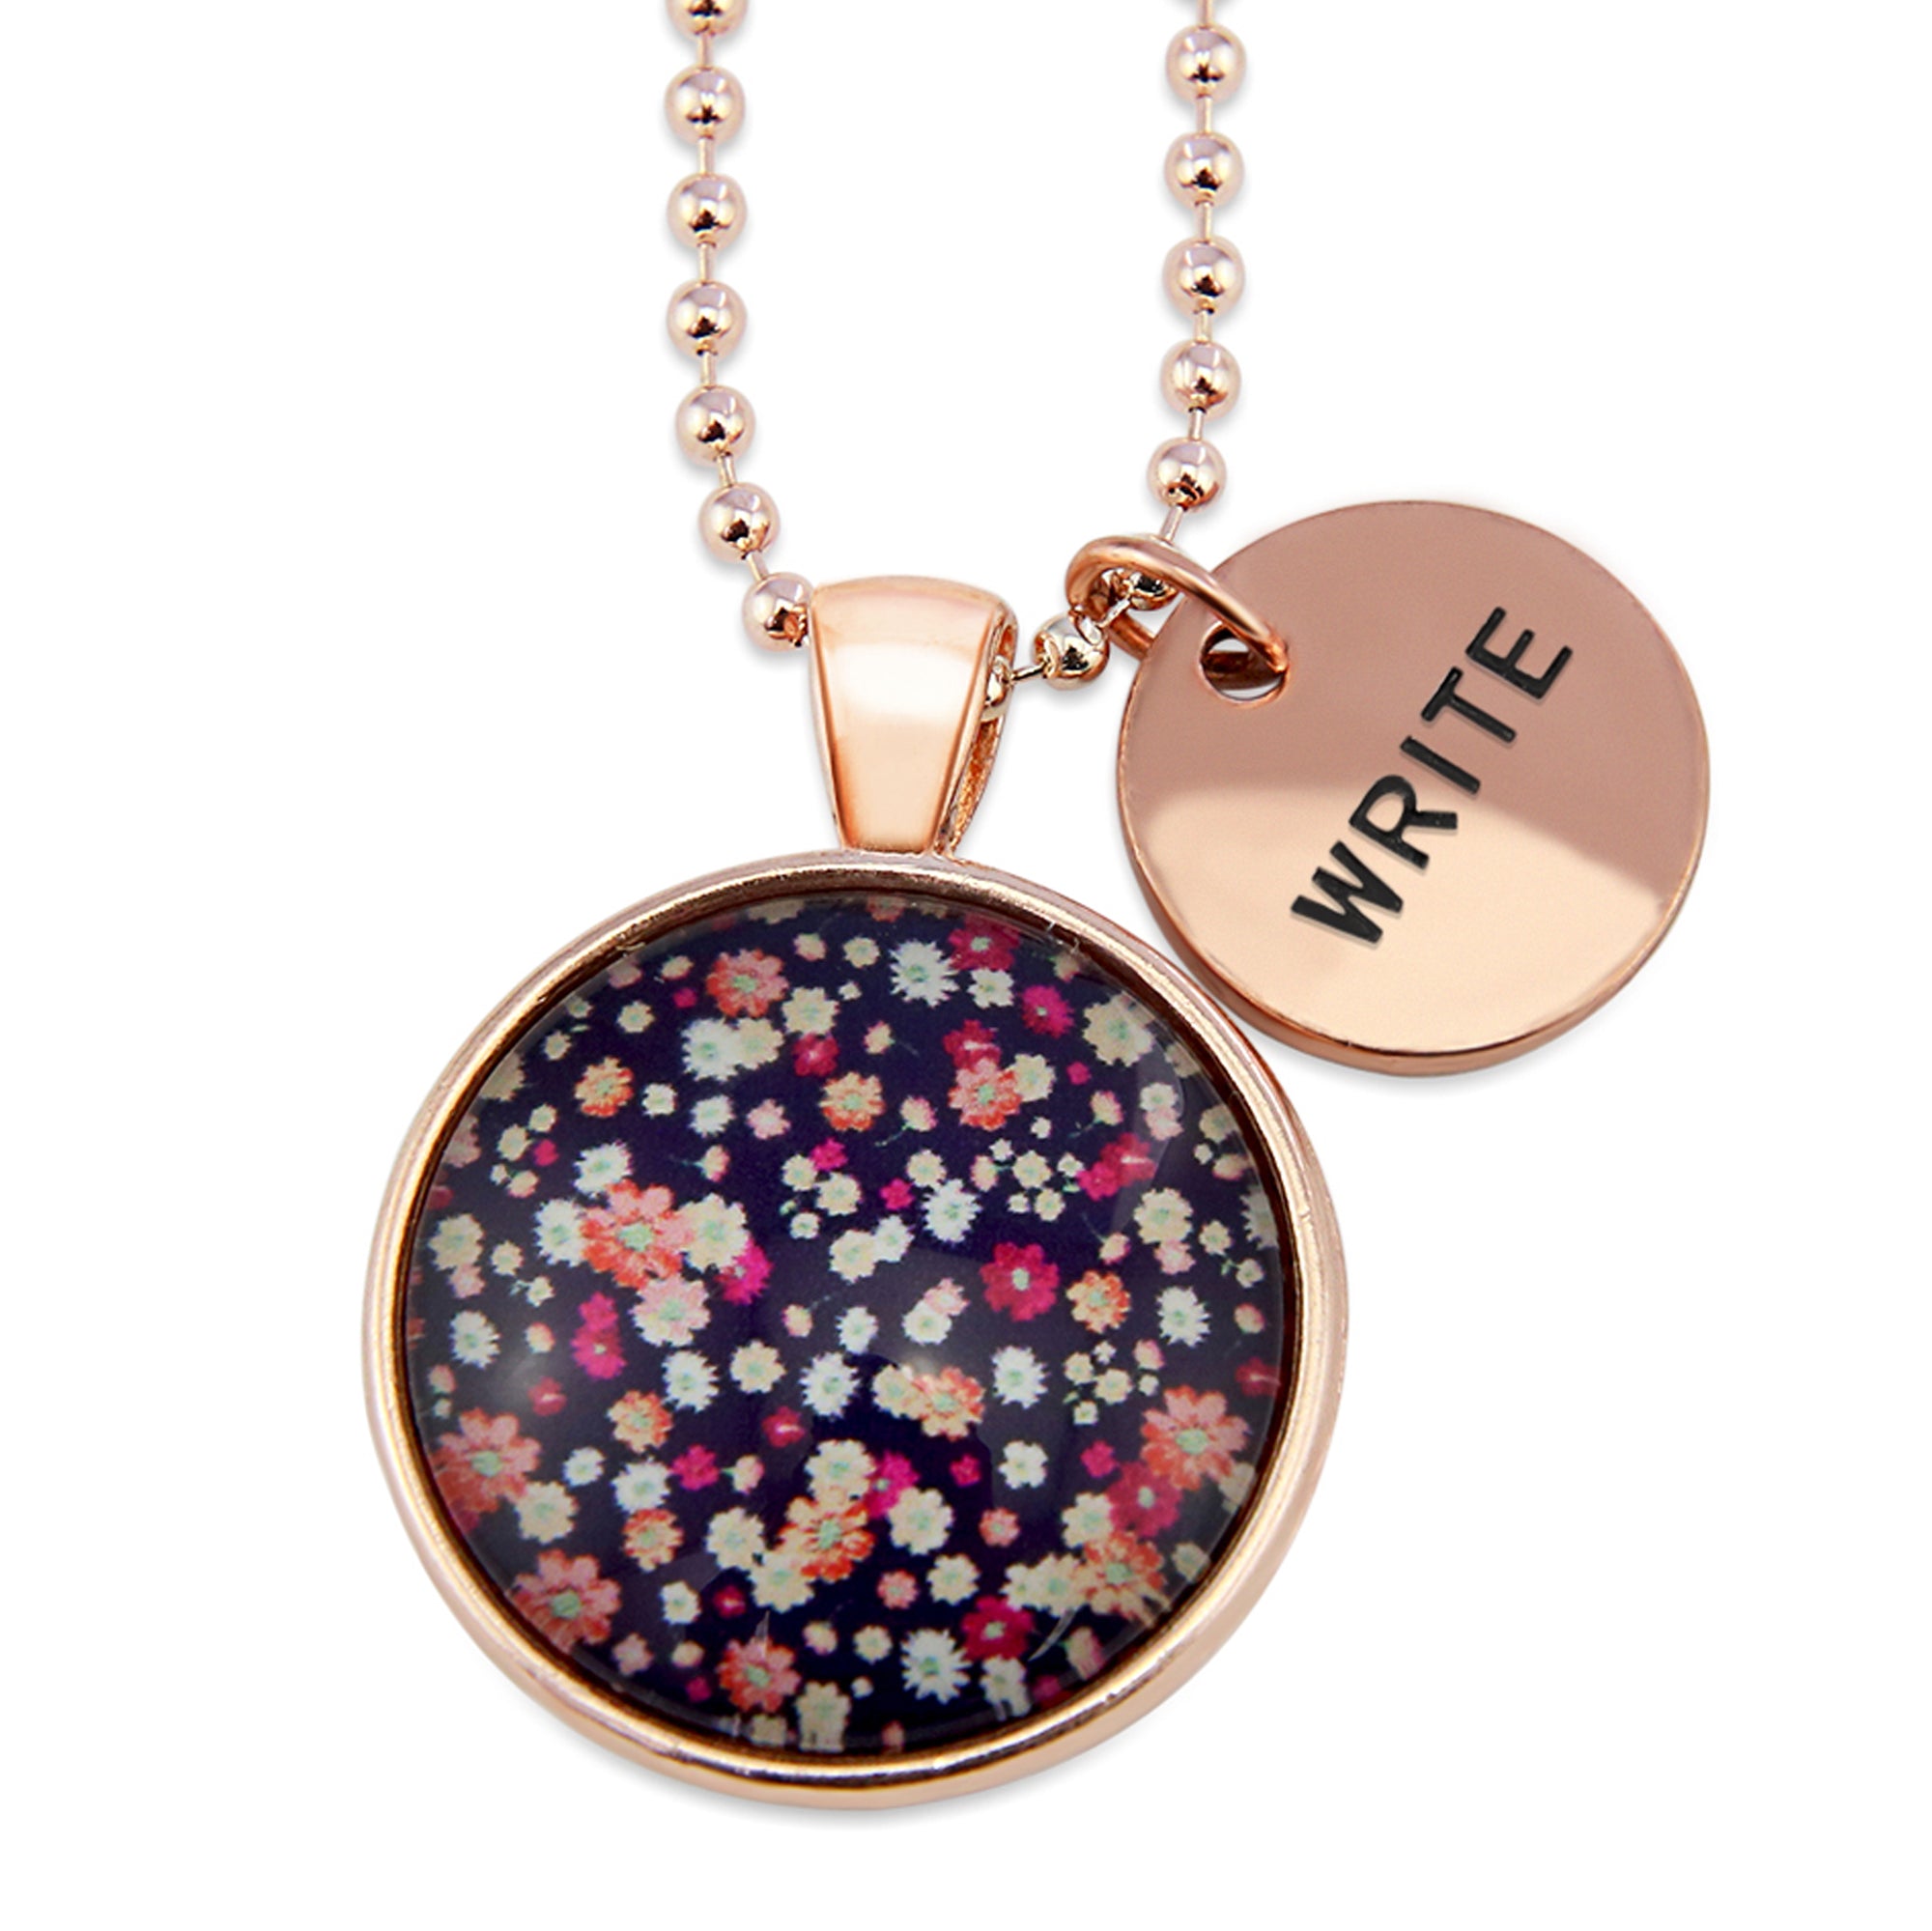 Heart & Soul Collection - Rose Gold 'WRITE' Necklace - Charlotte - (11222)